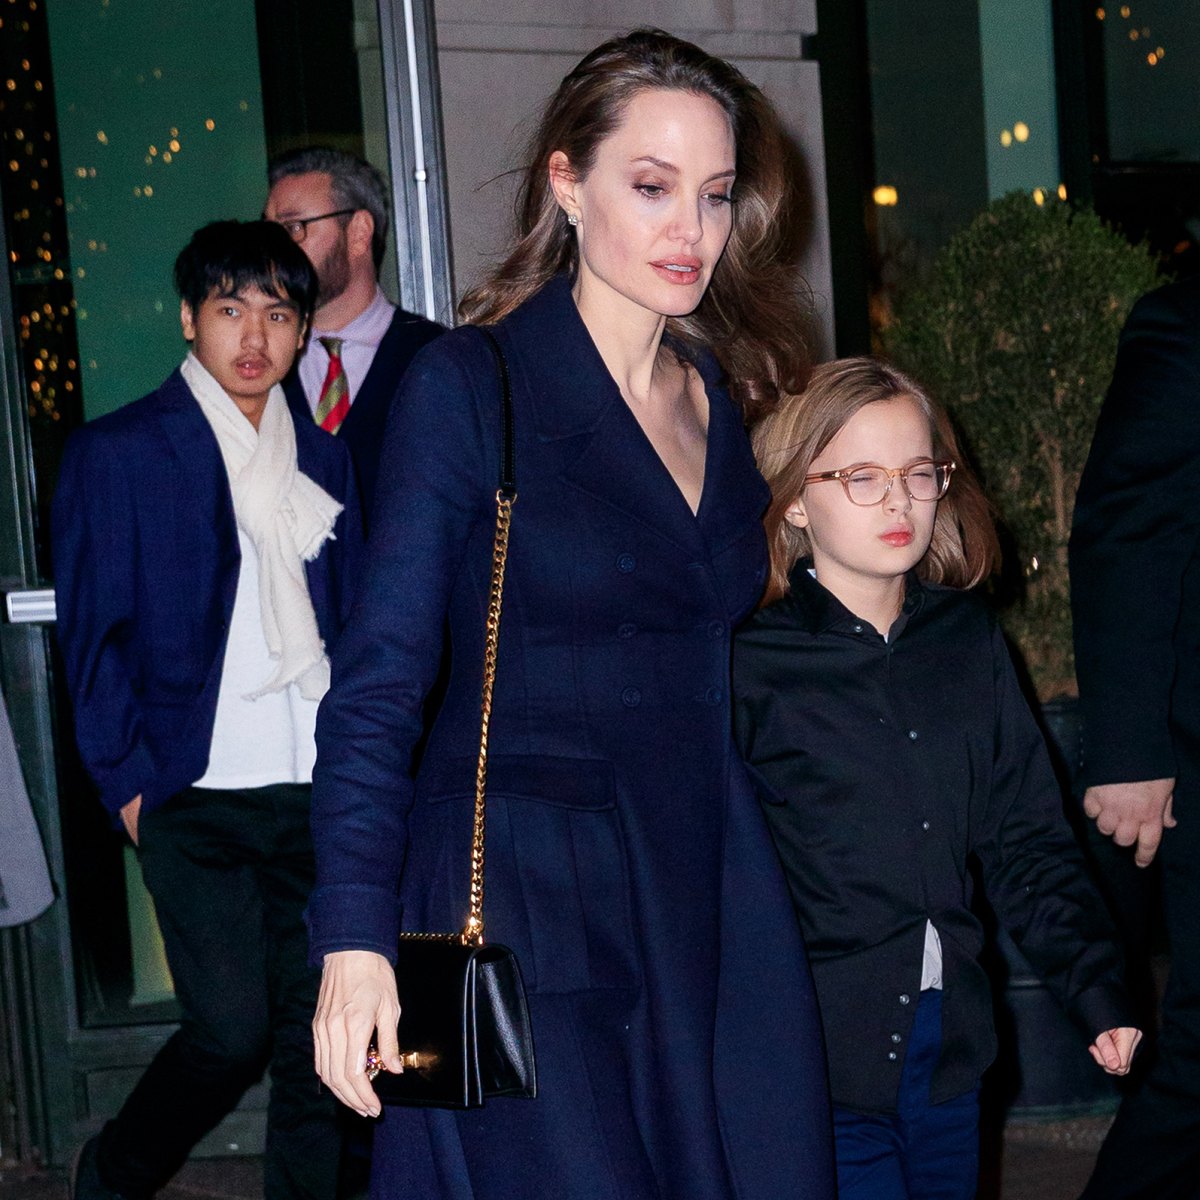 Angelina Jolie looks chic in all black as she arrives to JFK airport in NYC  with kids Pax and Vivienne as the movie star reveals her daughter  'inspired' her to take on